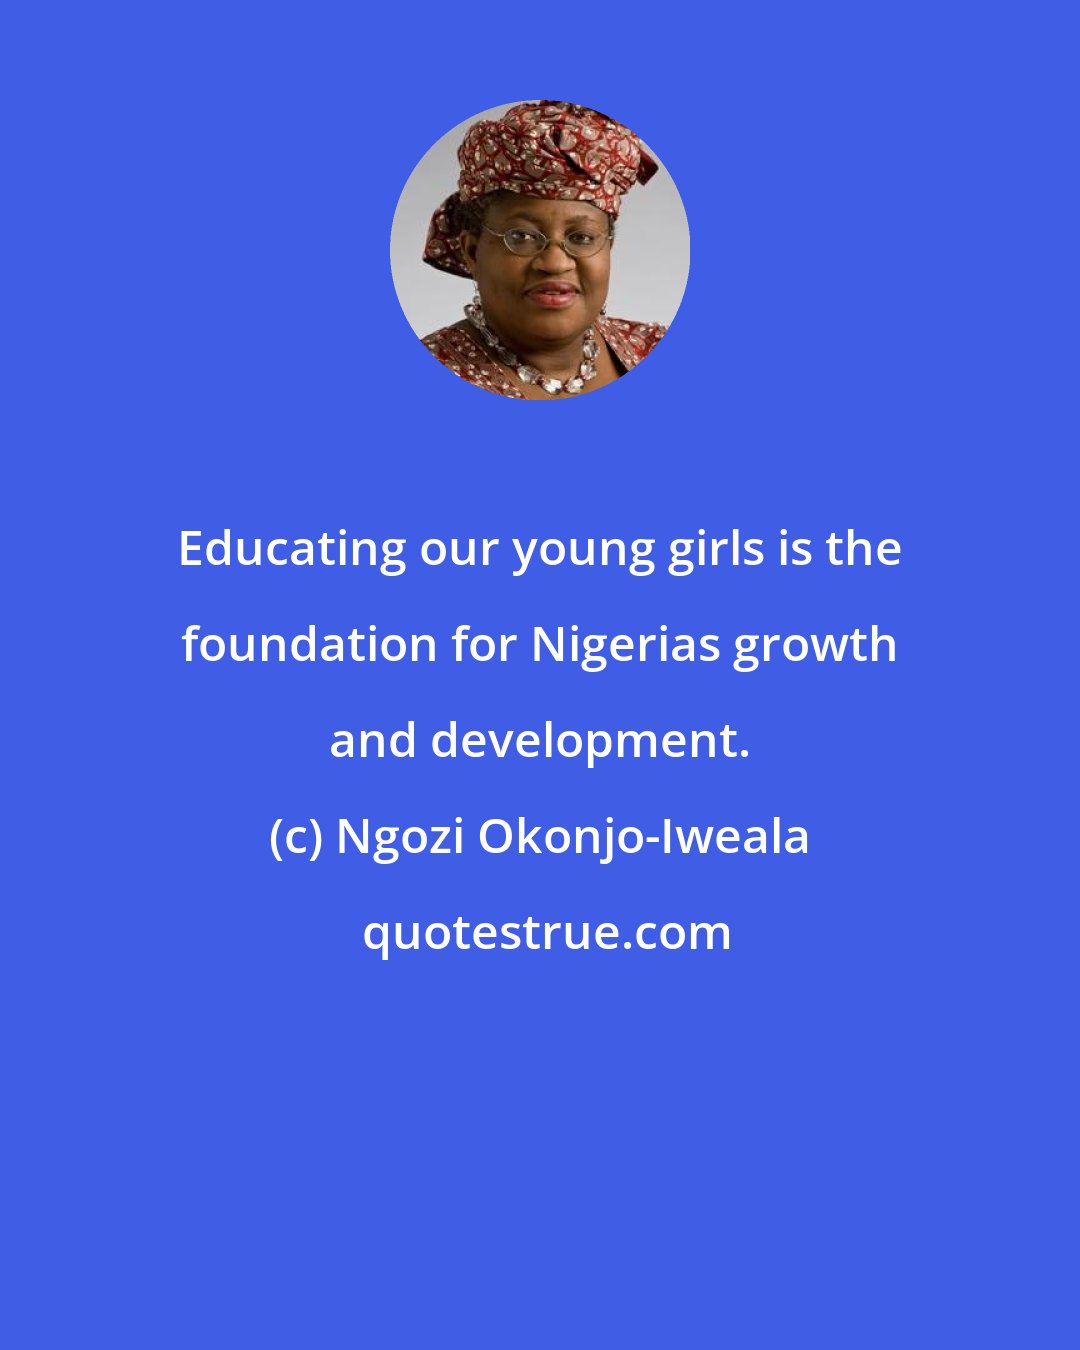 Ngozi Okonjo-Iweala: Educating our young girls is the foundation for Nigerias growth and development.